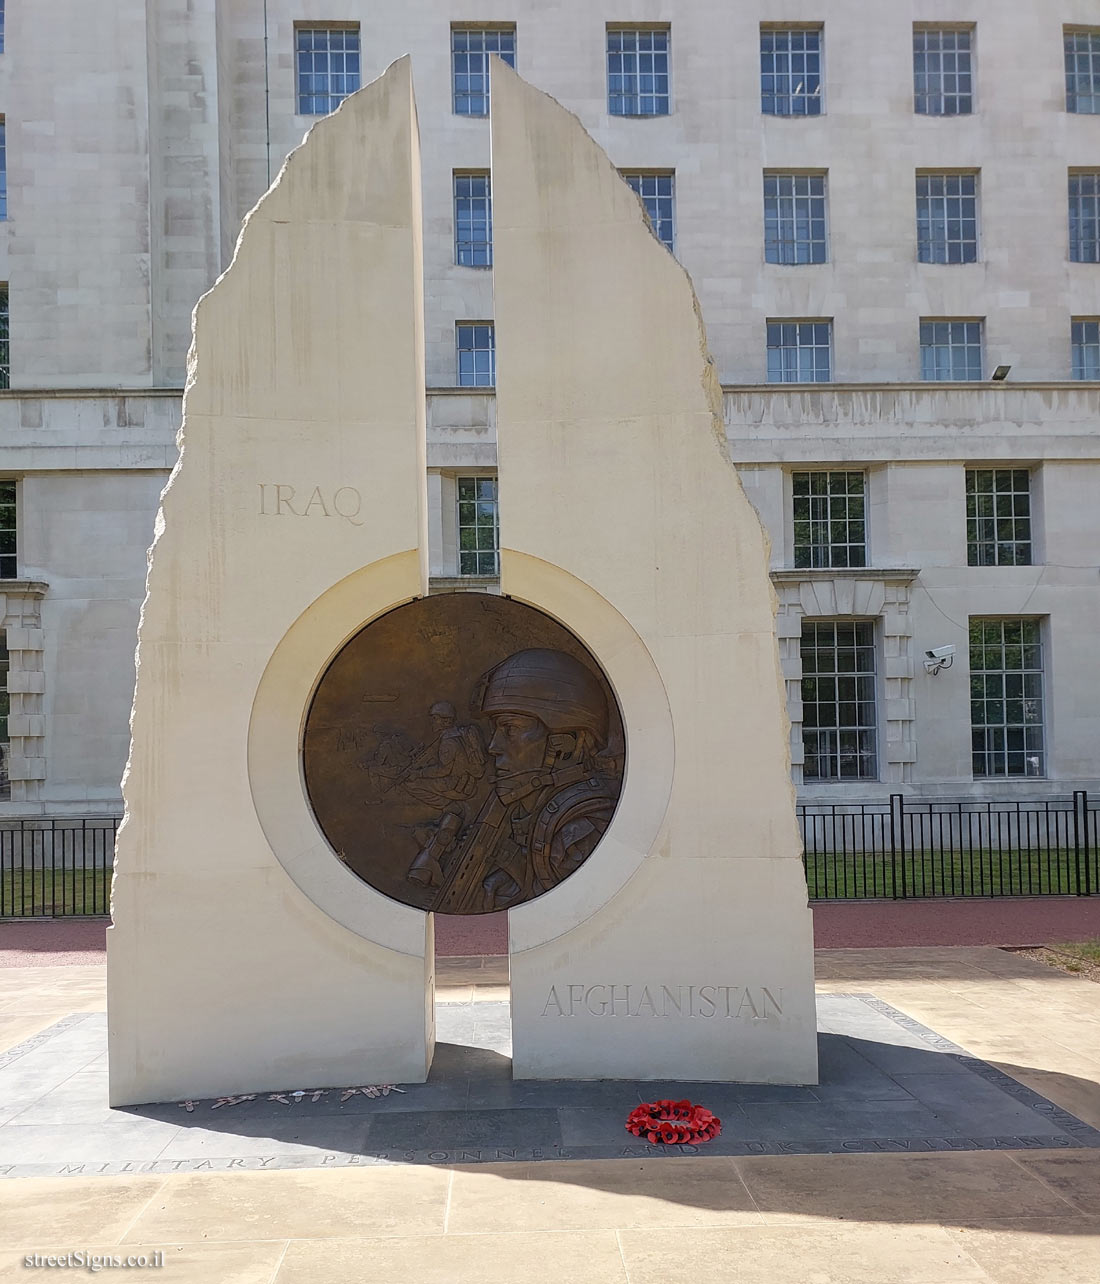 London - The Iraq and Afghanistan Memorial - Richmond Ter, London SW1A 2JL, UK